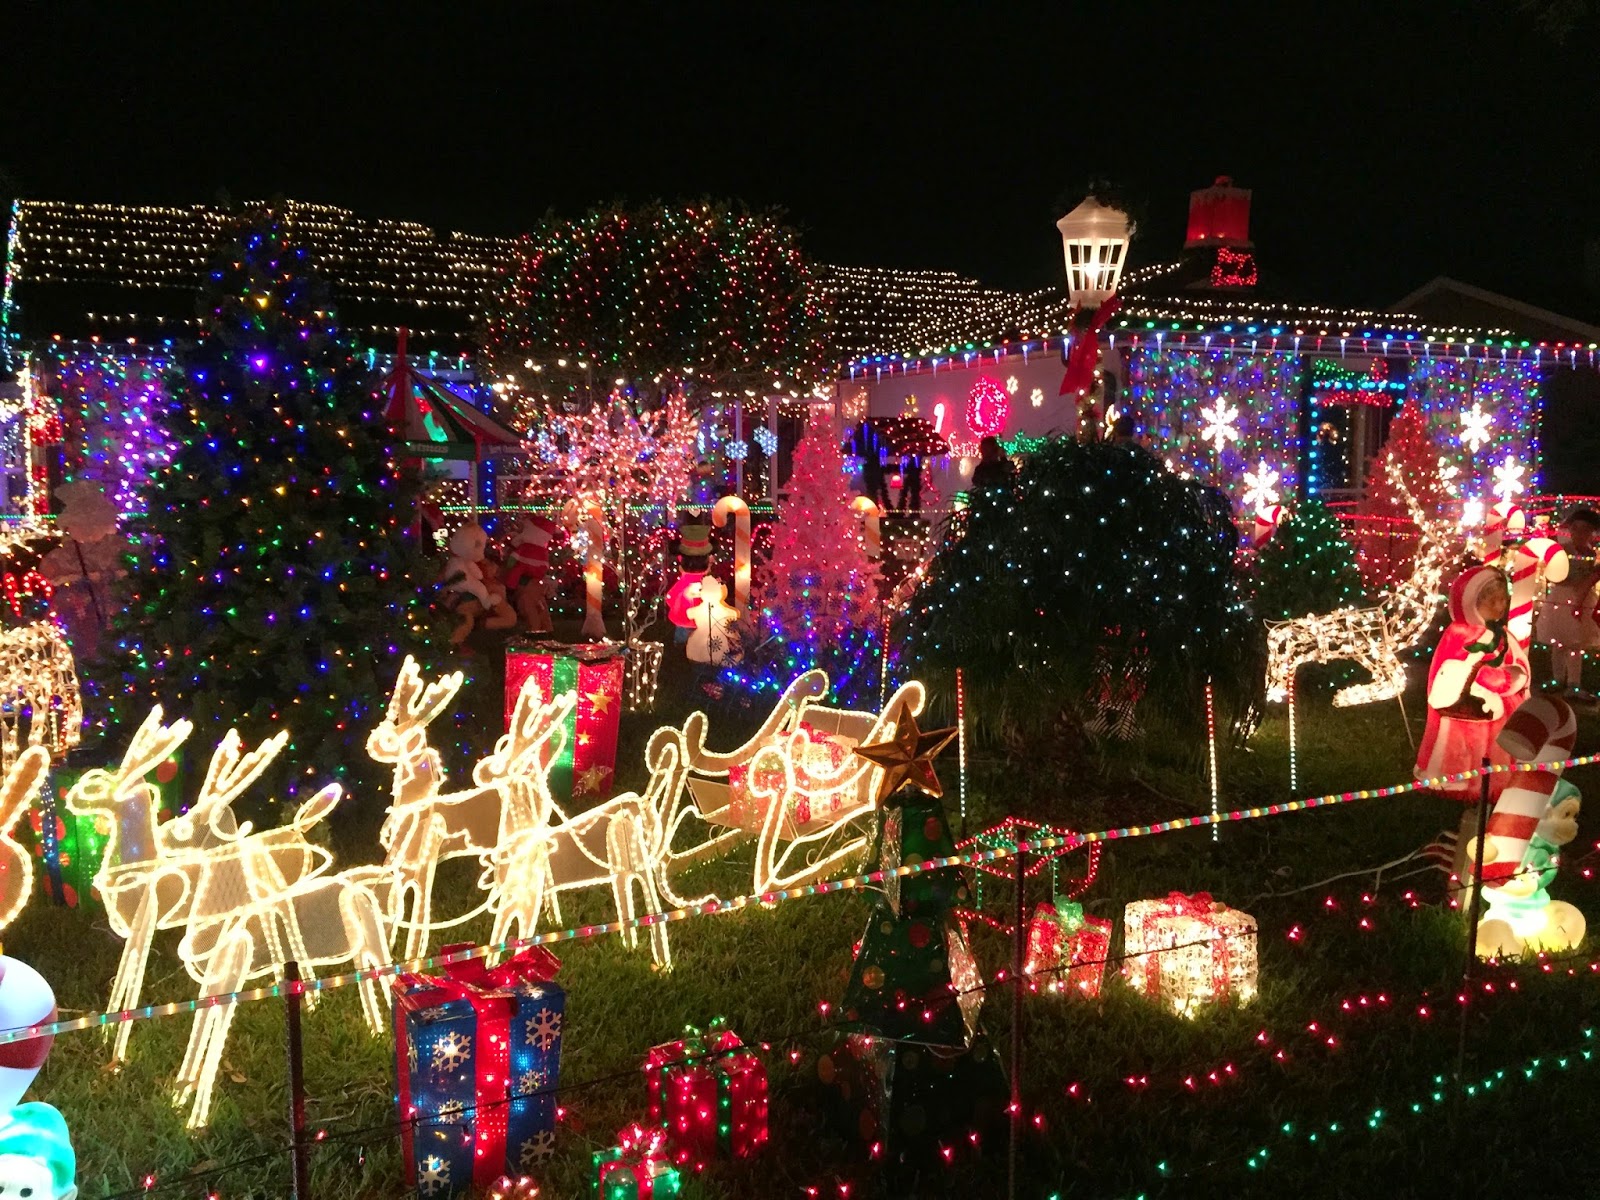 Flavorful Excursions: Where to See Awesome Christmas Lights